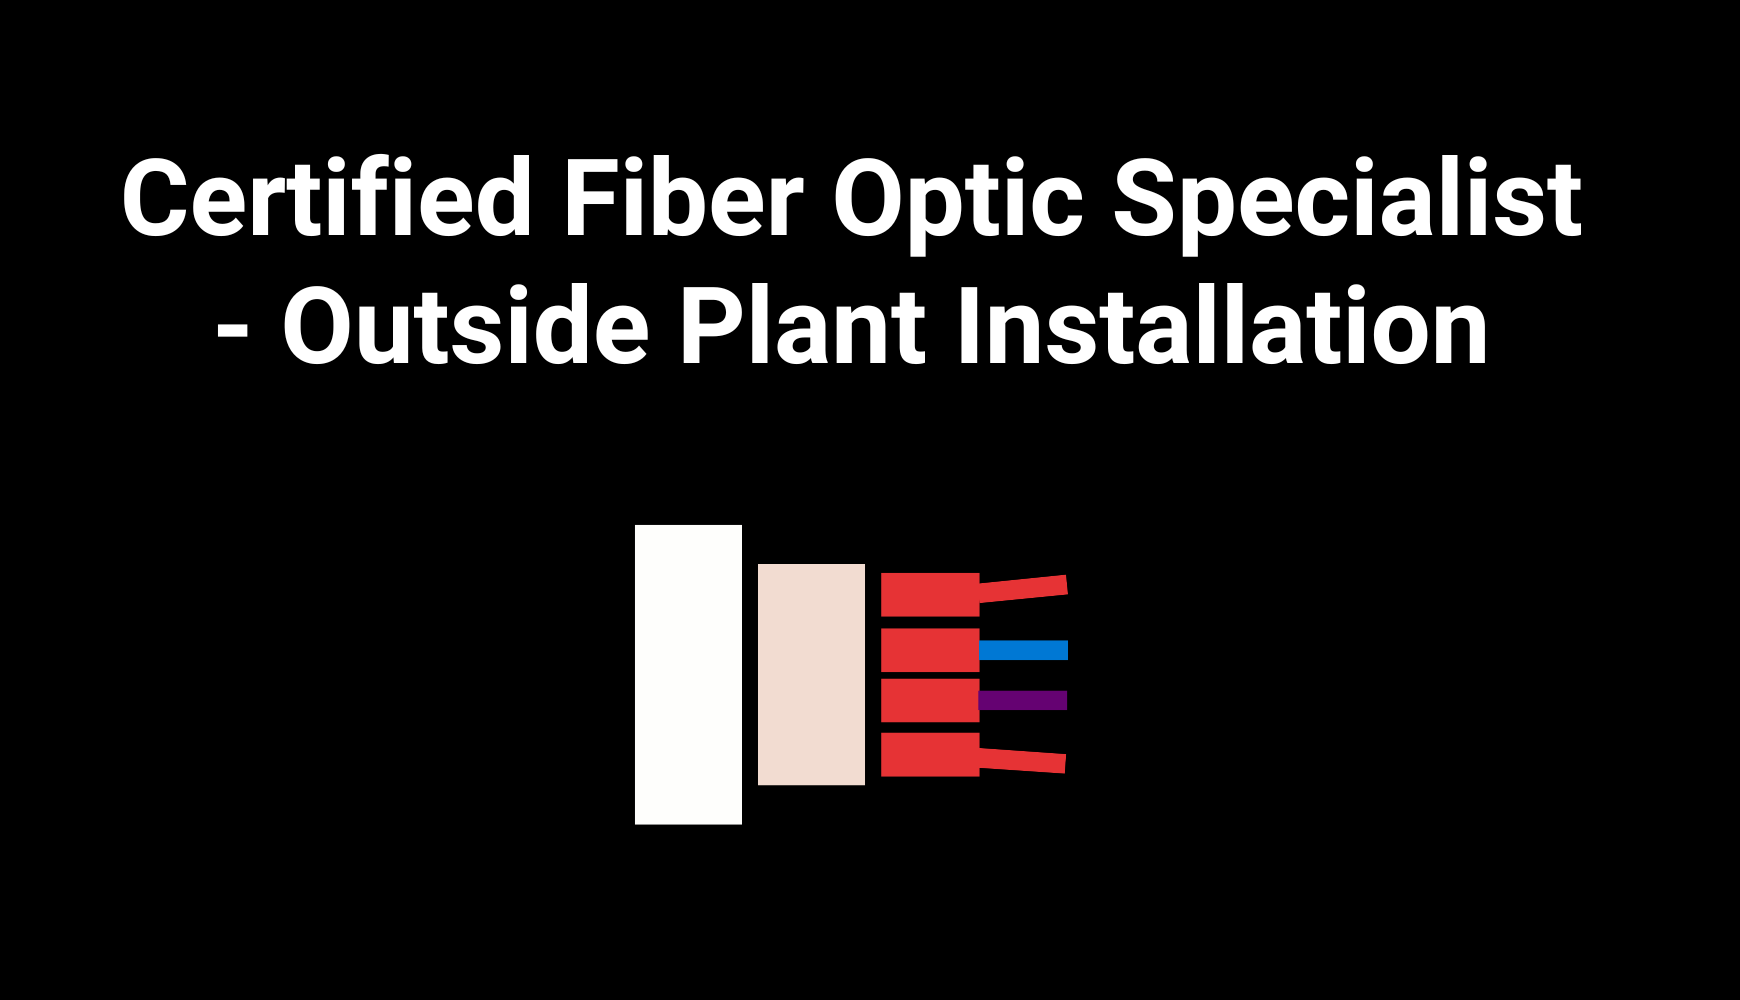 Certified Fiber Optic Specialist - Outside Plant Installation